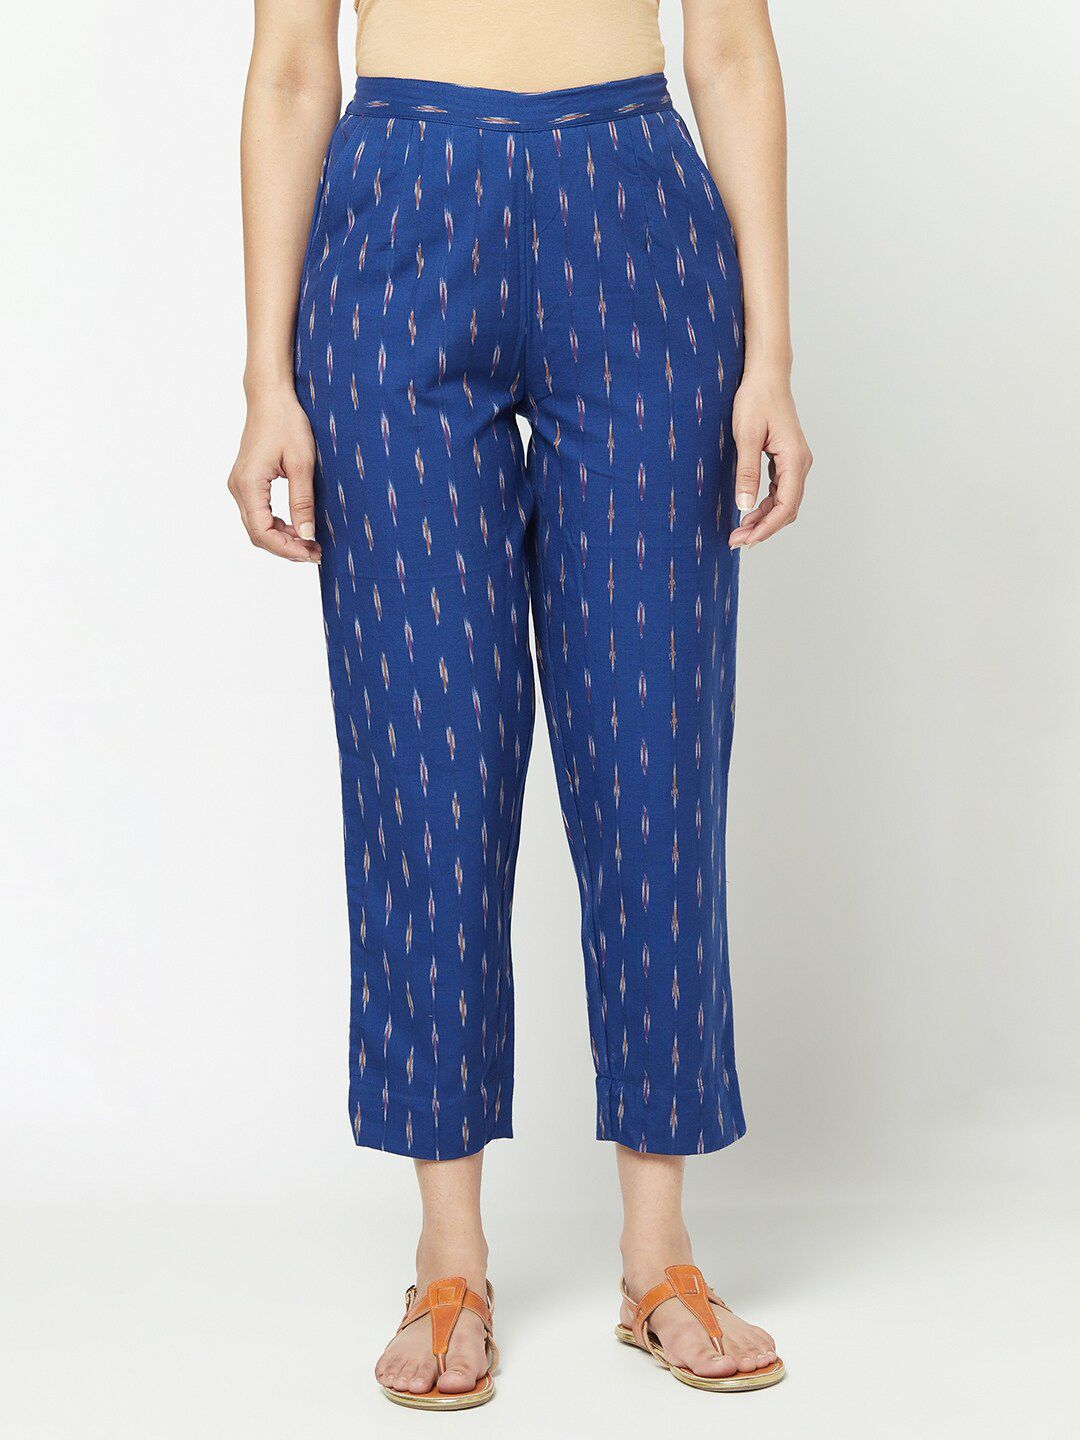 Fabindia Women Blue Ikat Printed Tapered Fit Trousers Price in India